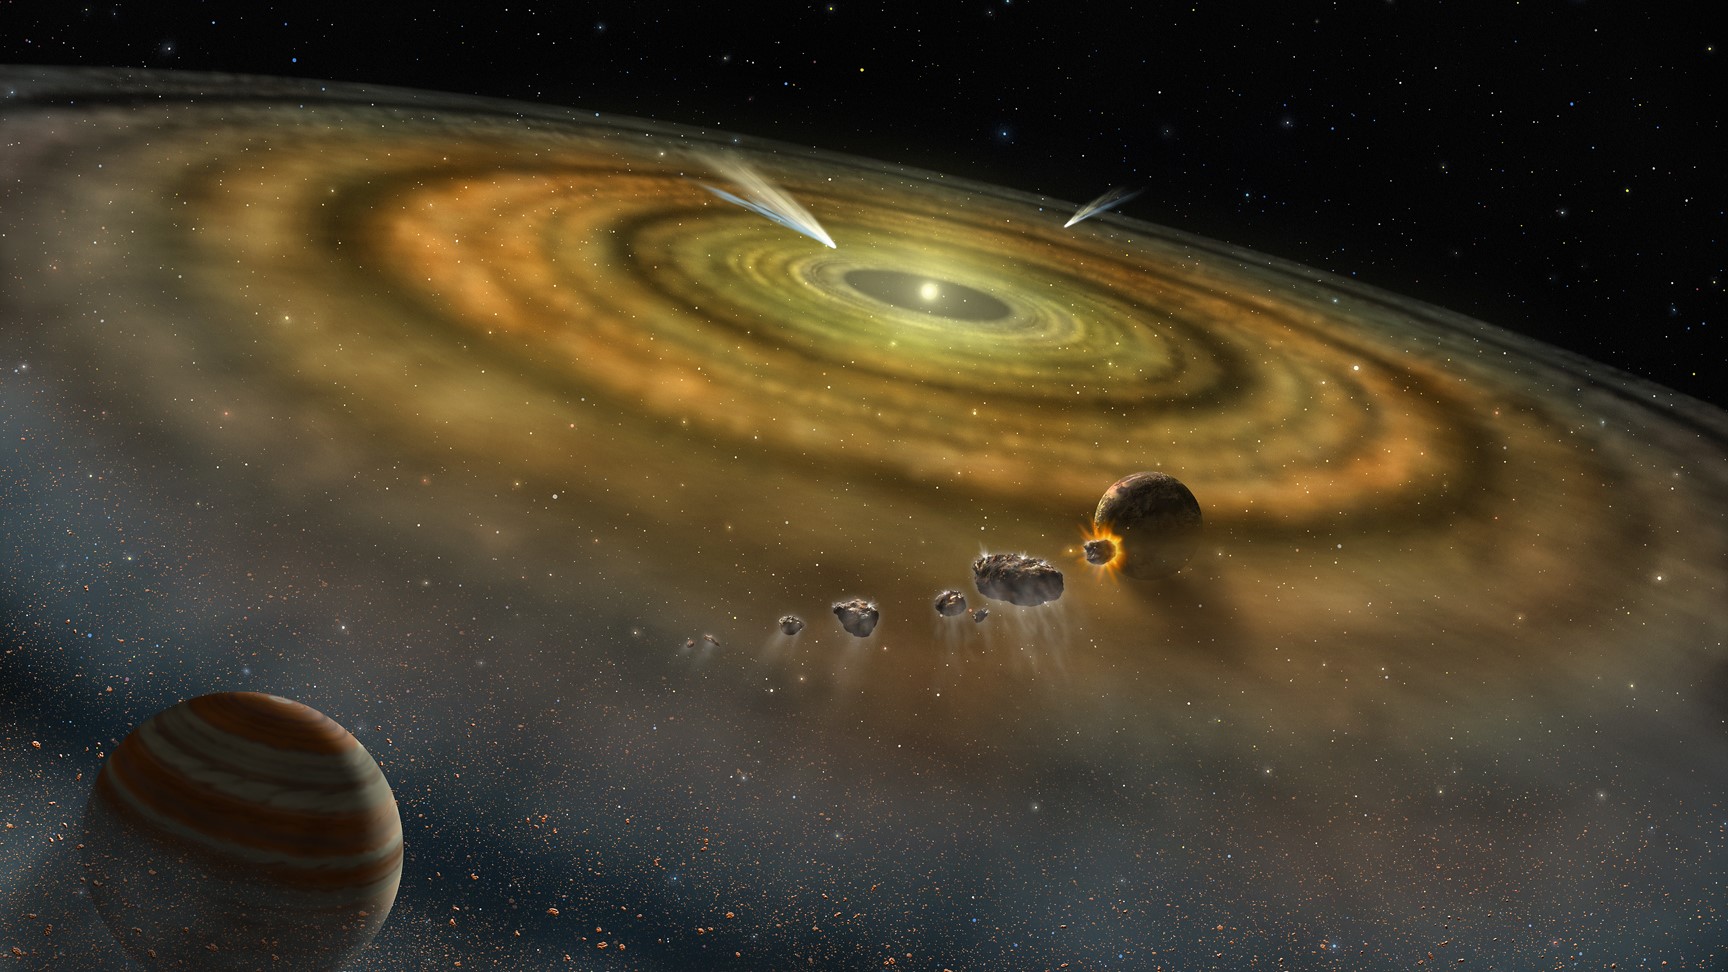 An artist's depiction of planets forming from a disk of material surrounding a star.